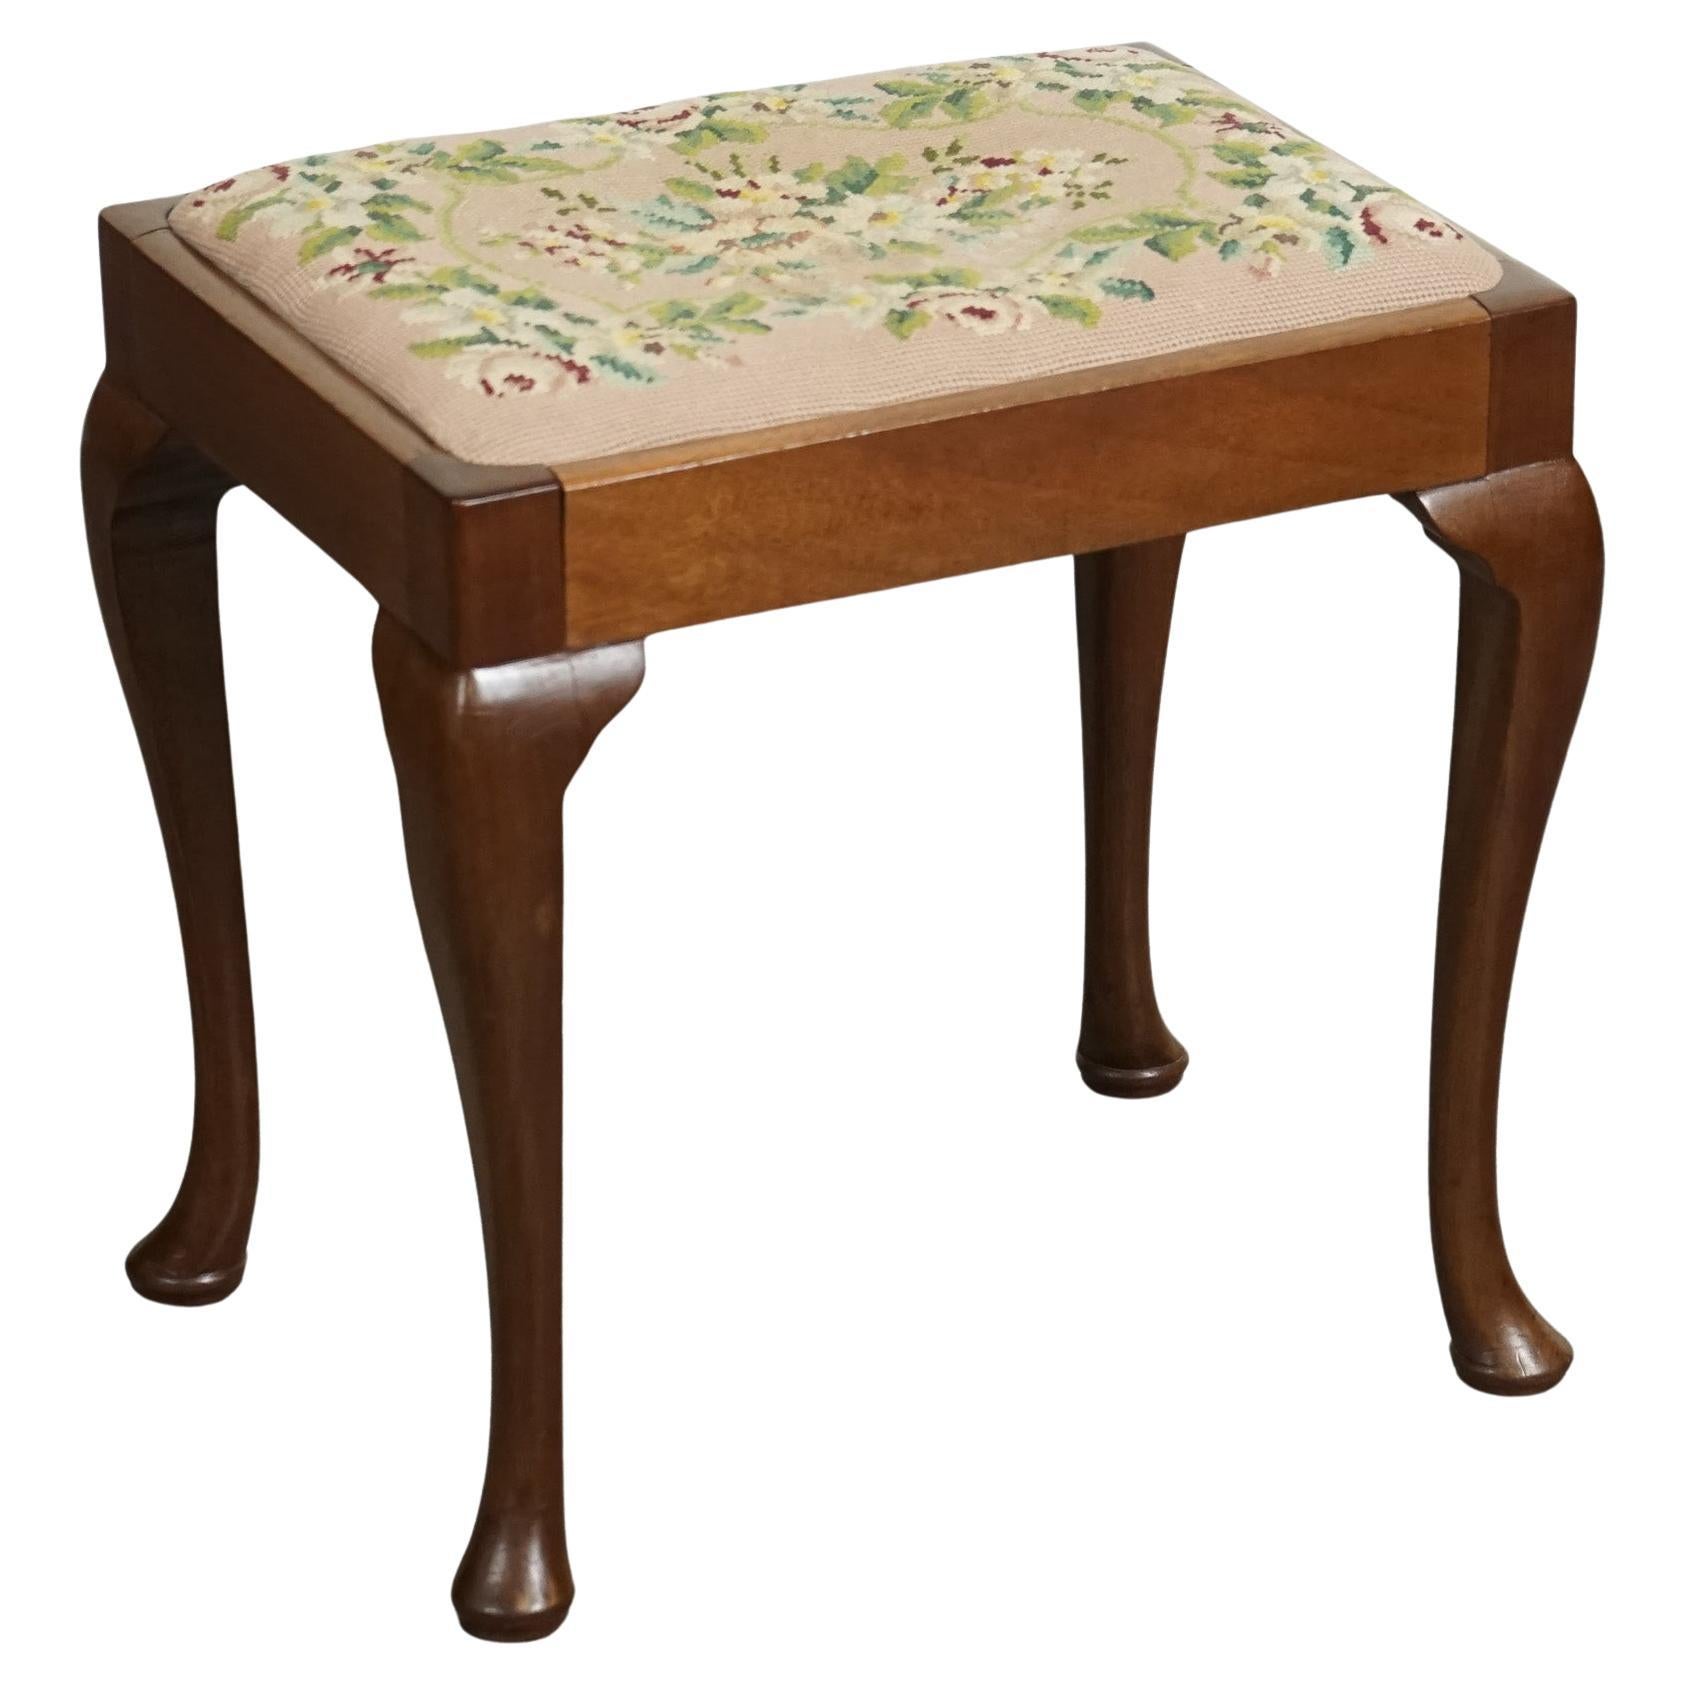 LOVELY PIANO DRESSING TABLE STOOL WITH FLOWER STITCHWORK WITH QUEEN ANNE LEGS j1 For Sale